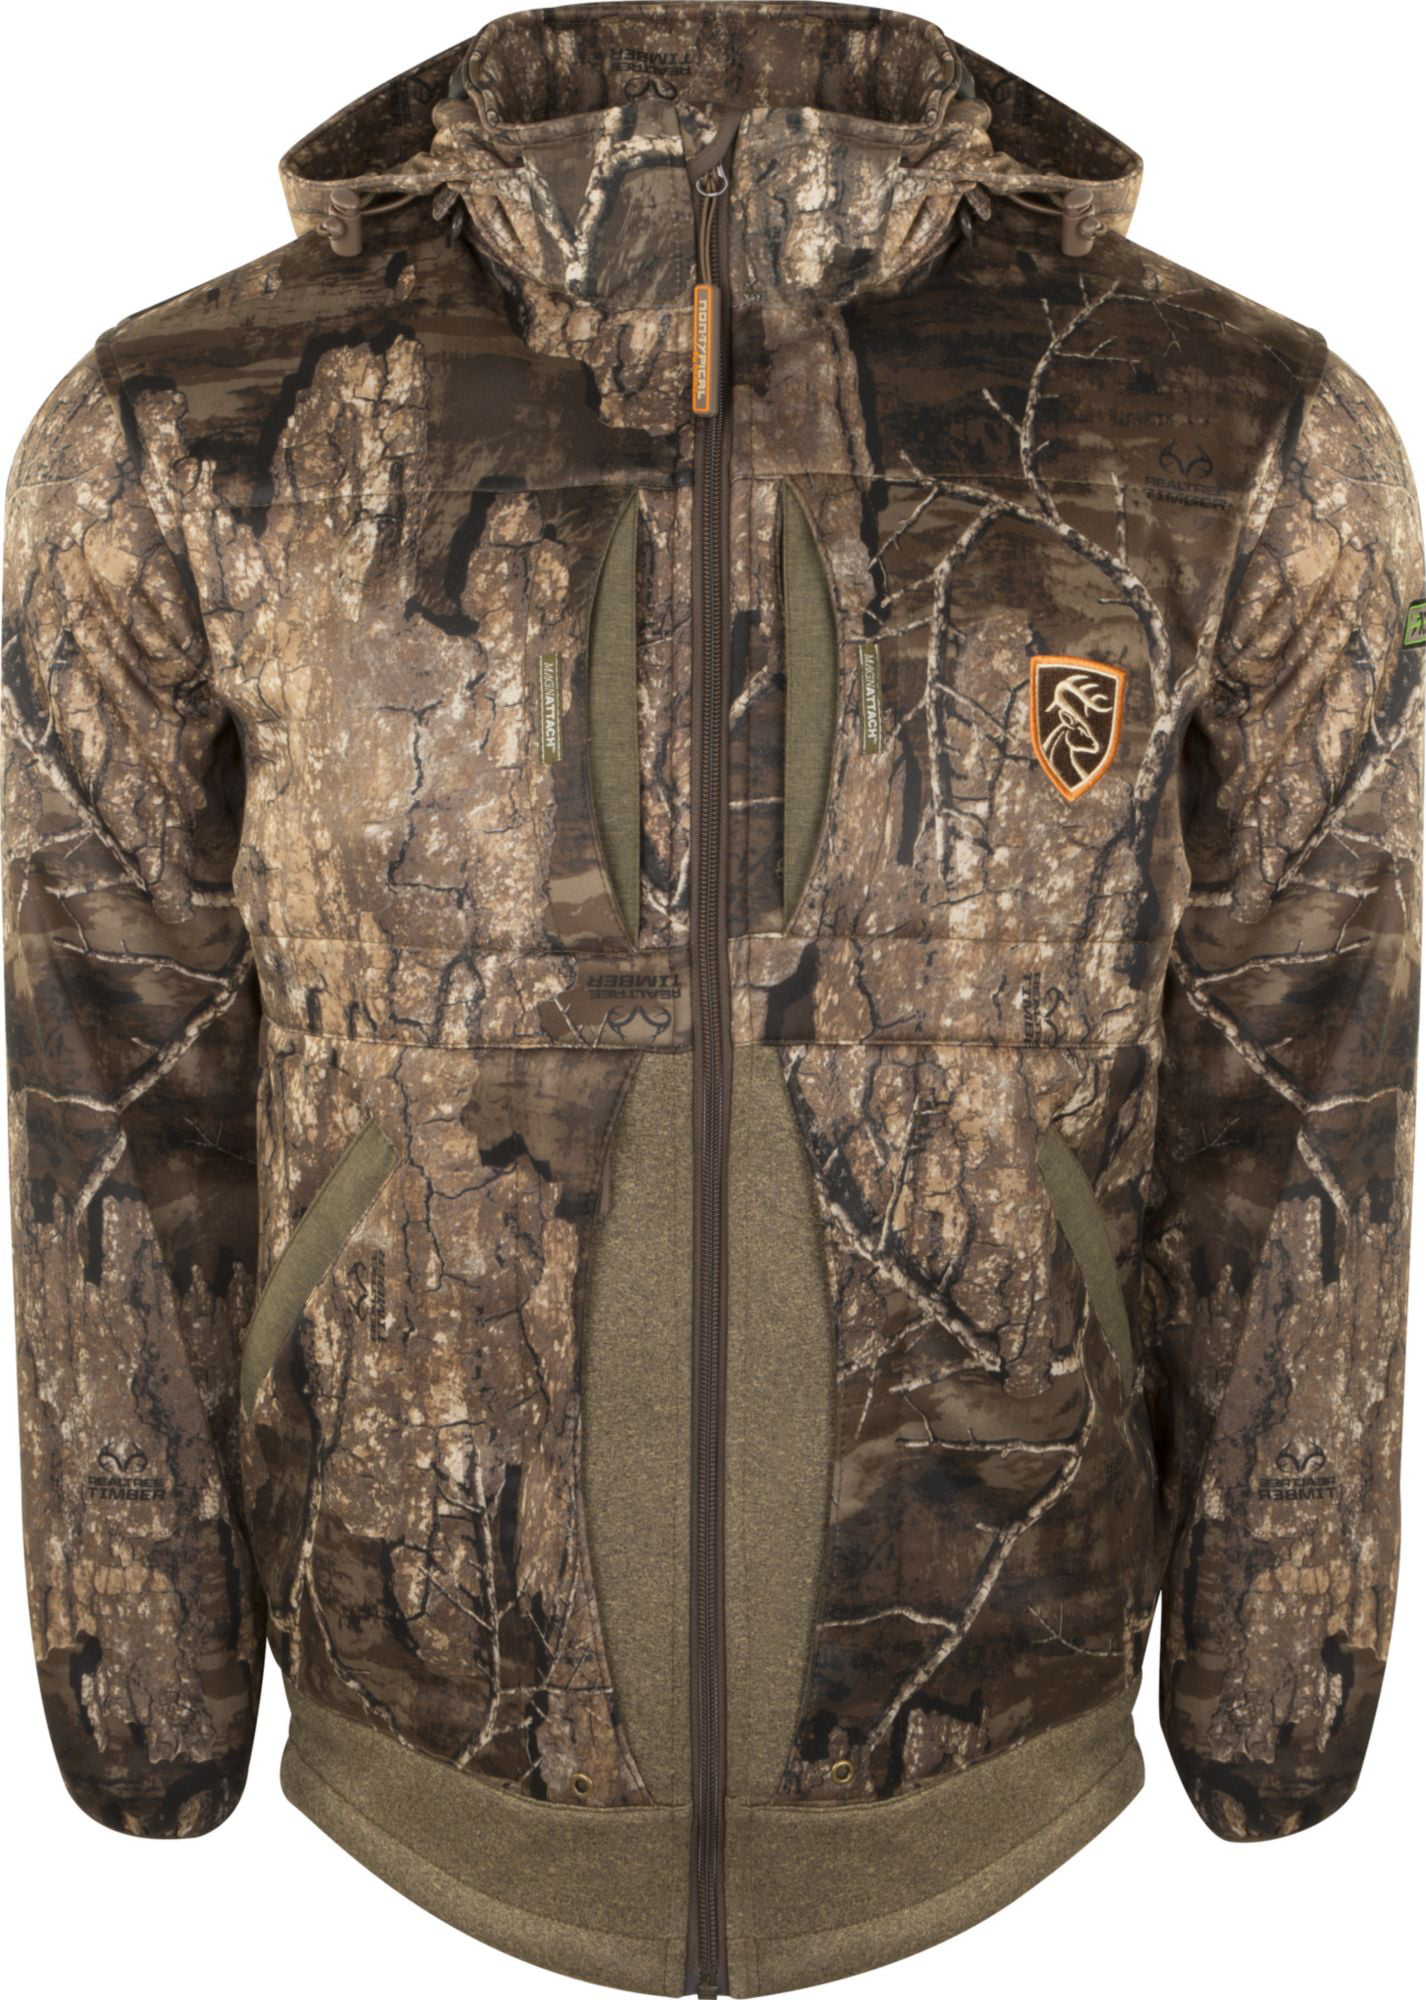 DRAKE TYPICAL STAND ENDURANCE JACKET WITH AGION XL - Walmart.com